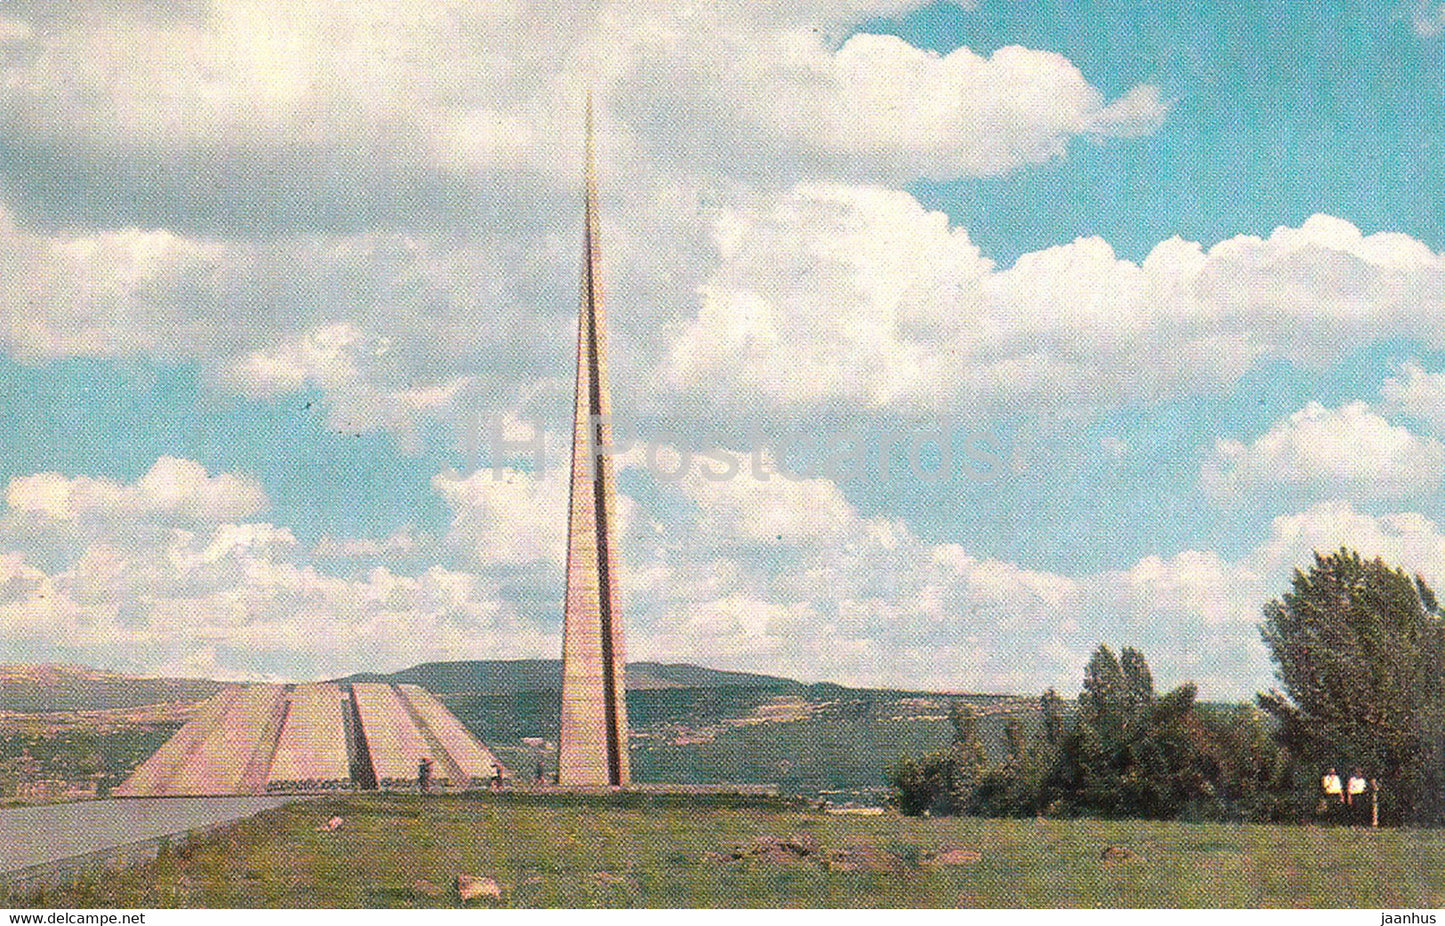 Yerevan - Memorial to the Victims of the 1915 massacre of the Armenians - Armenia USSR - unused - JH Postcards